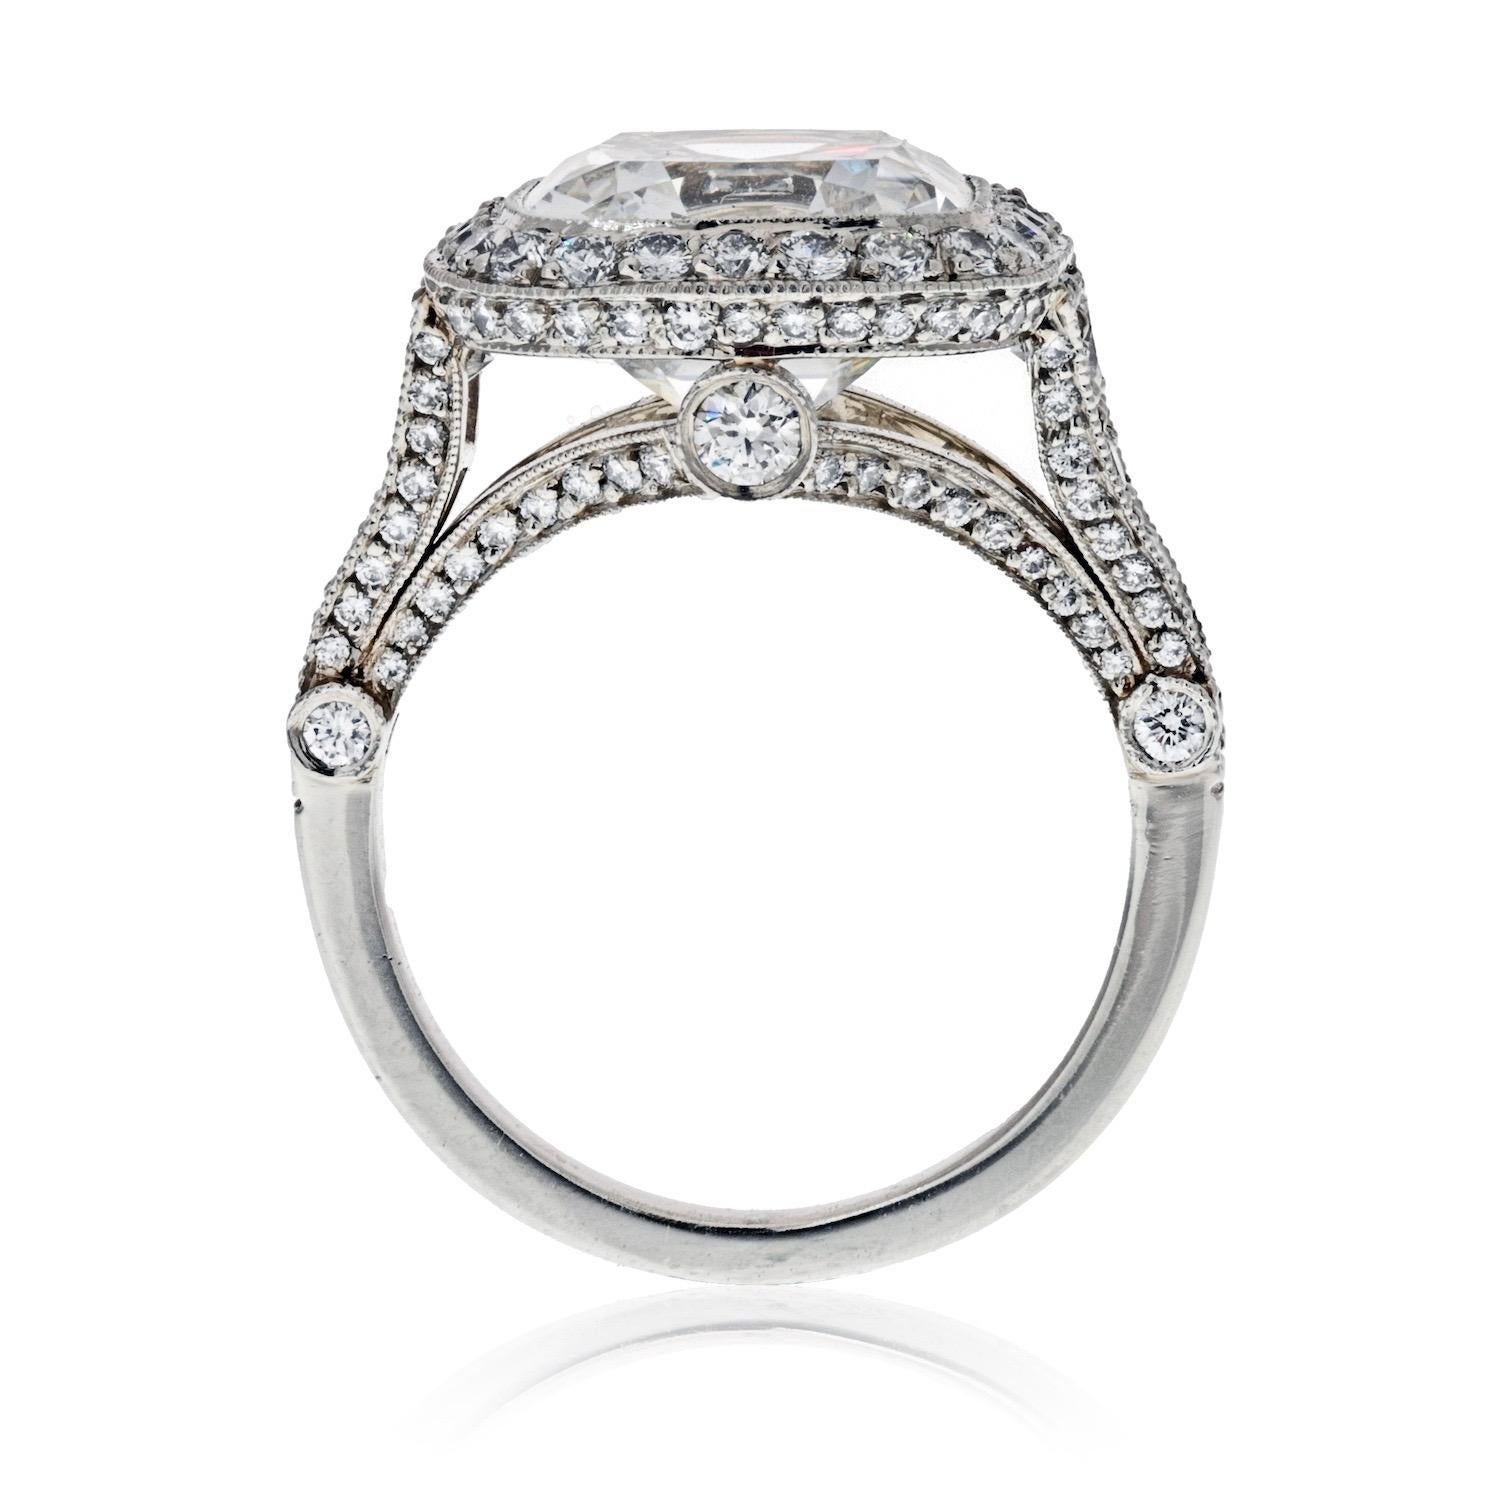 Legacy diamond engagement ring, centering on a cushion-cut diamond weighing 5.56 carats, with a pave diamond surround and basket, as well as five graduated round-cut diamonds at either shoulder and six larger round-cut profile diamonds, the 134